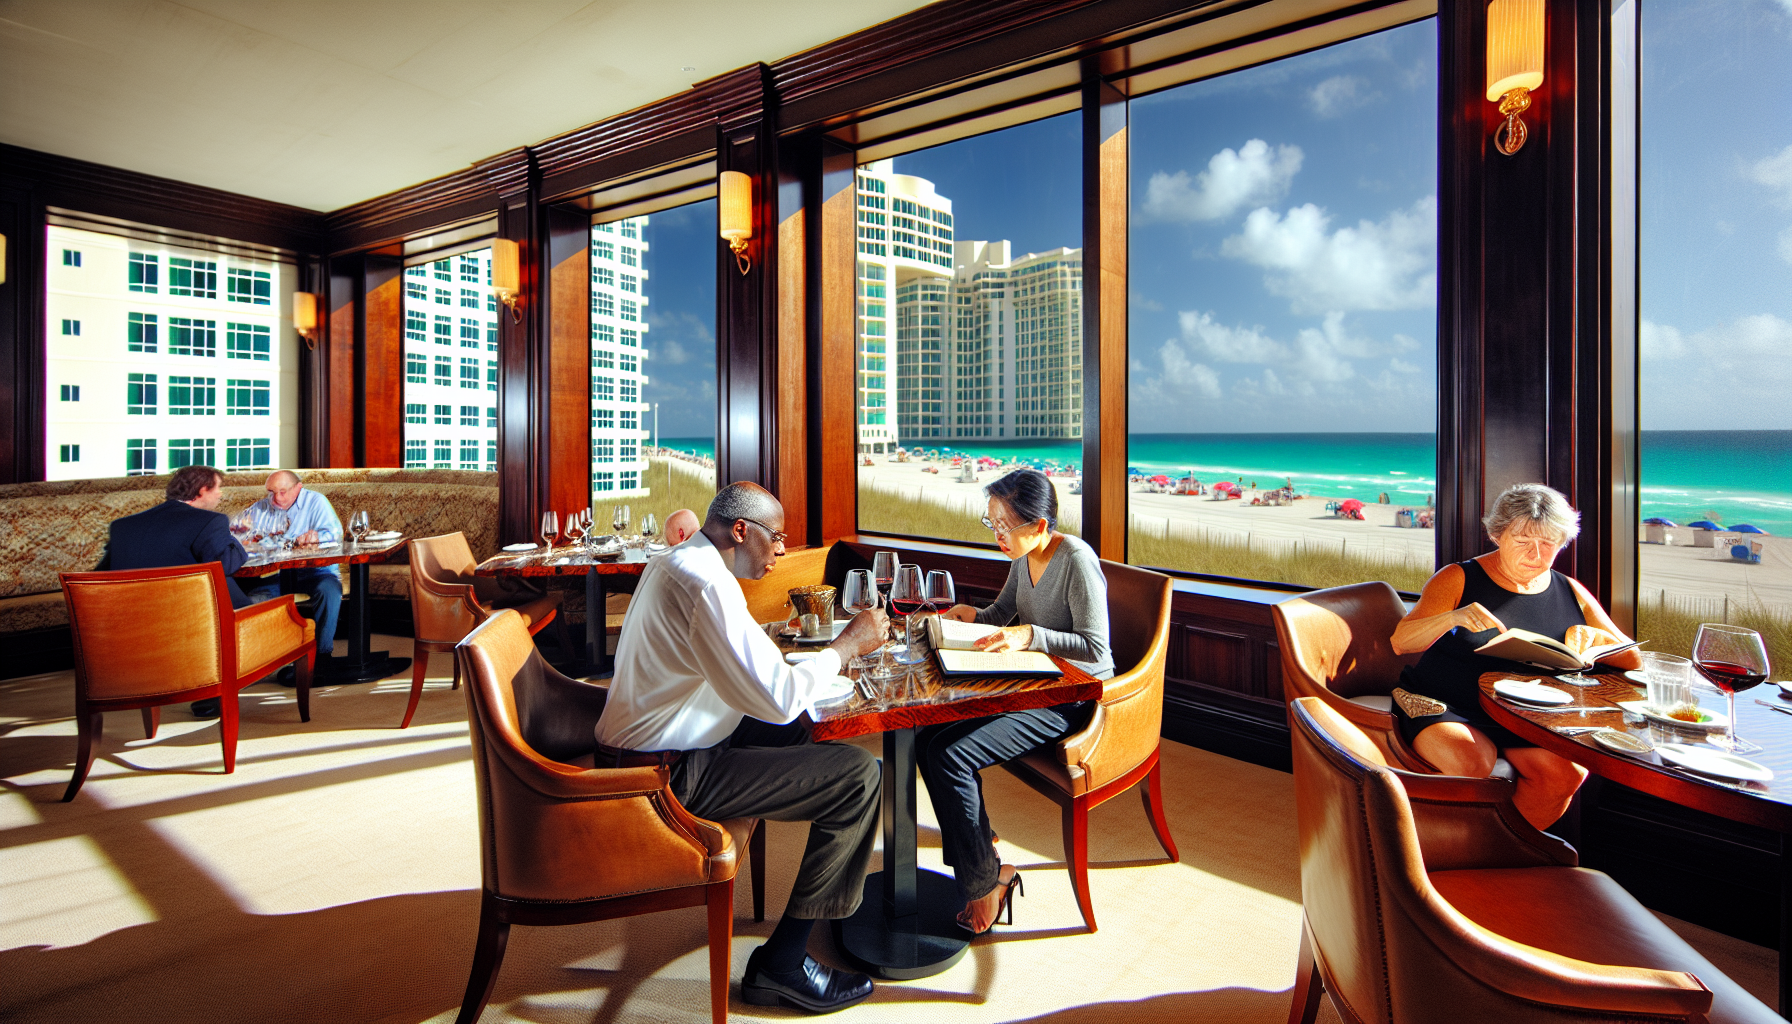 A bustling dining room with a view of Fort Lauderdale beach